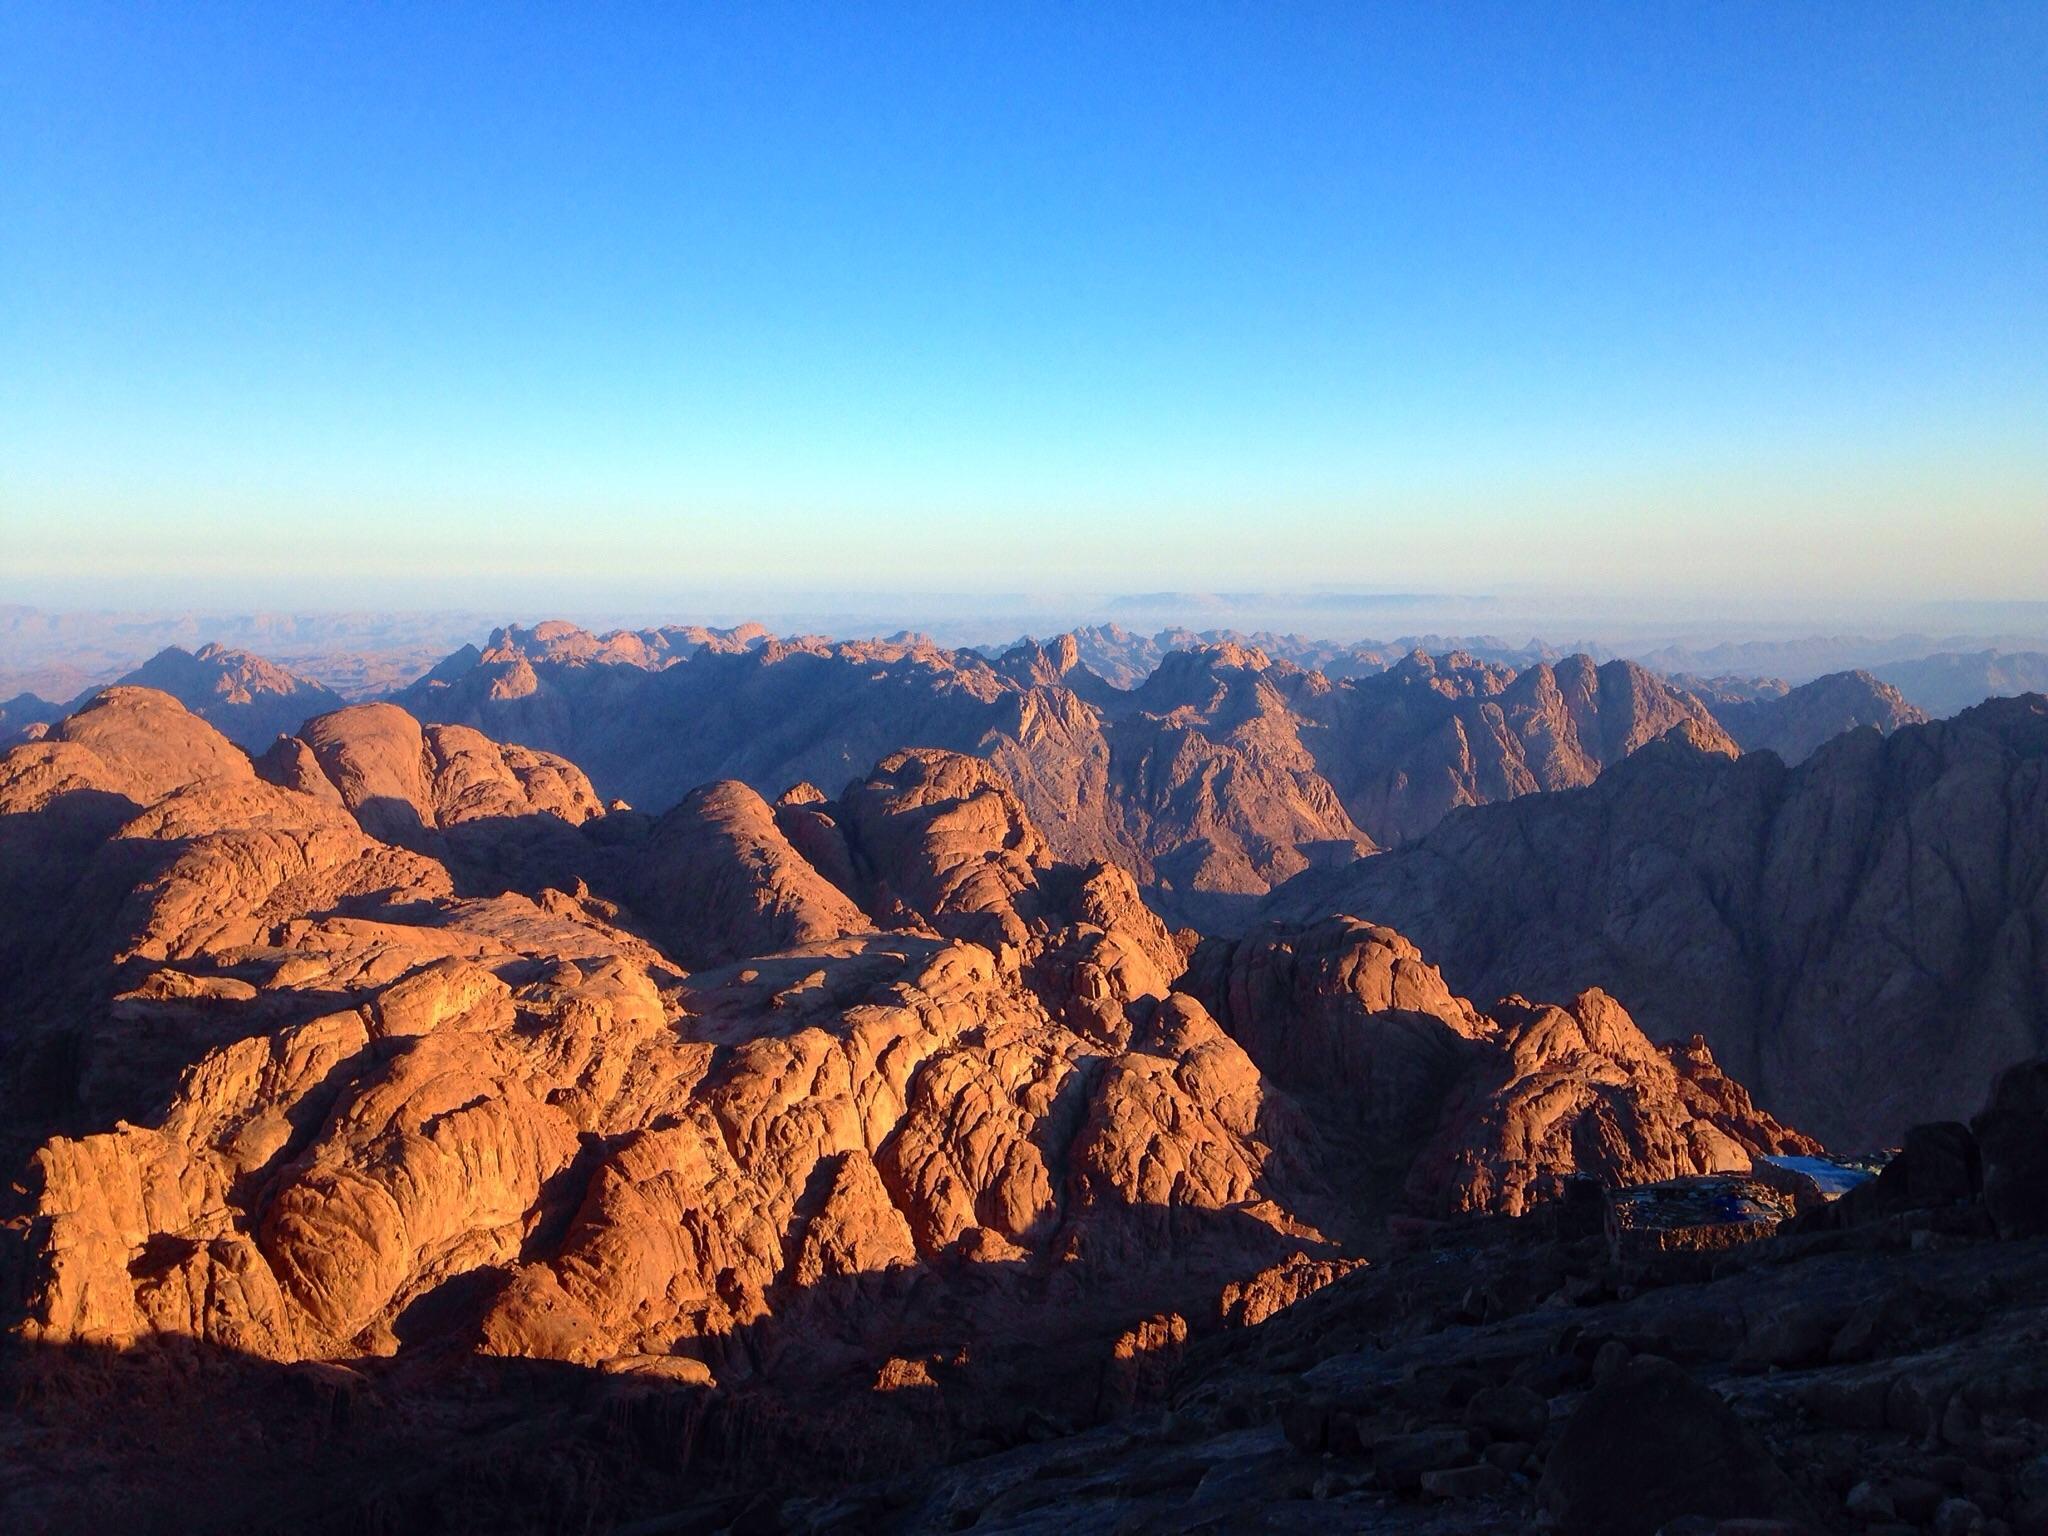 I see how Moses got lost here. Top of Mt. Sinai, Egypt OC